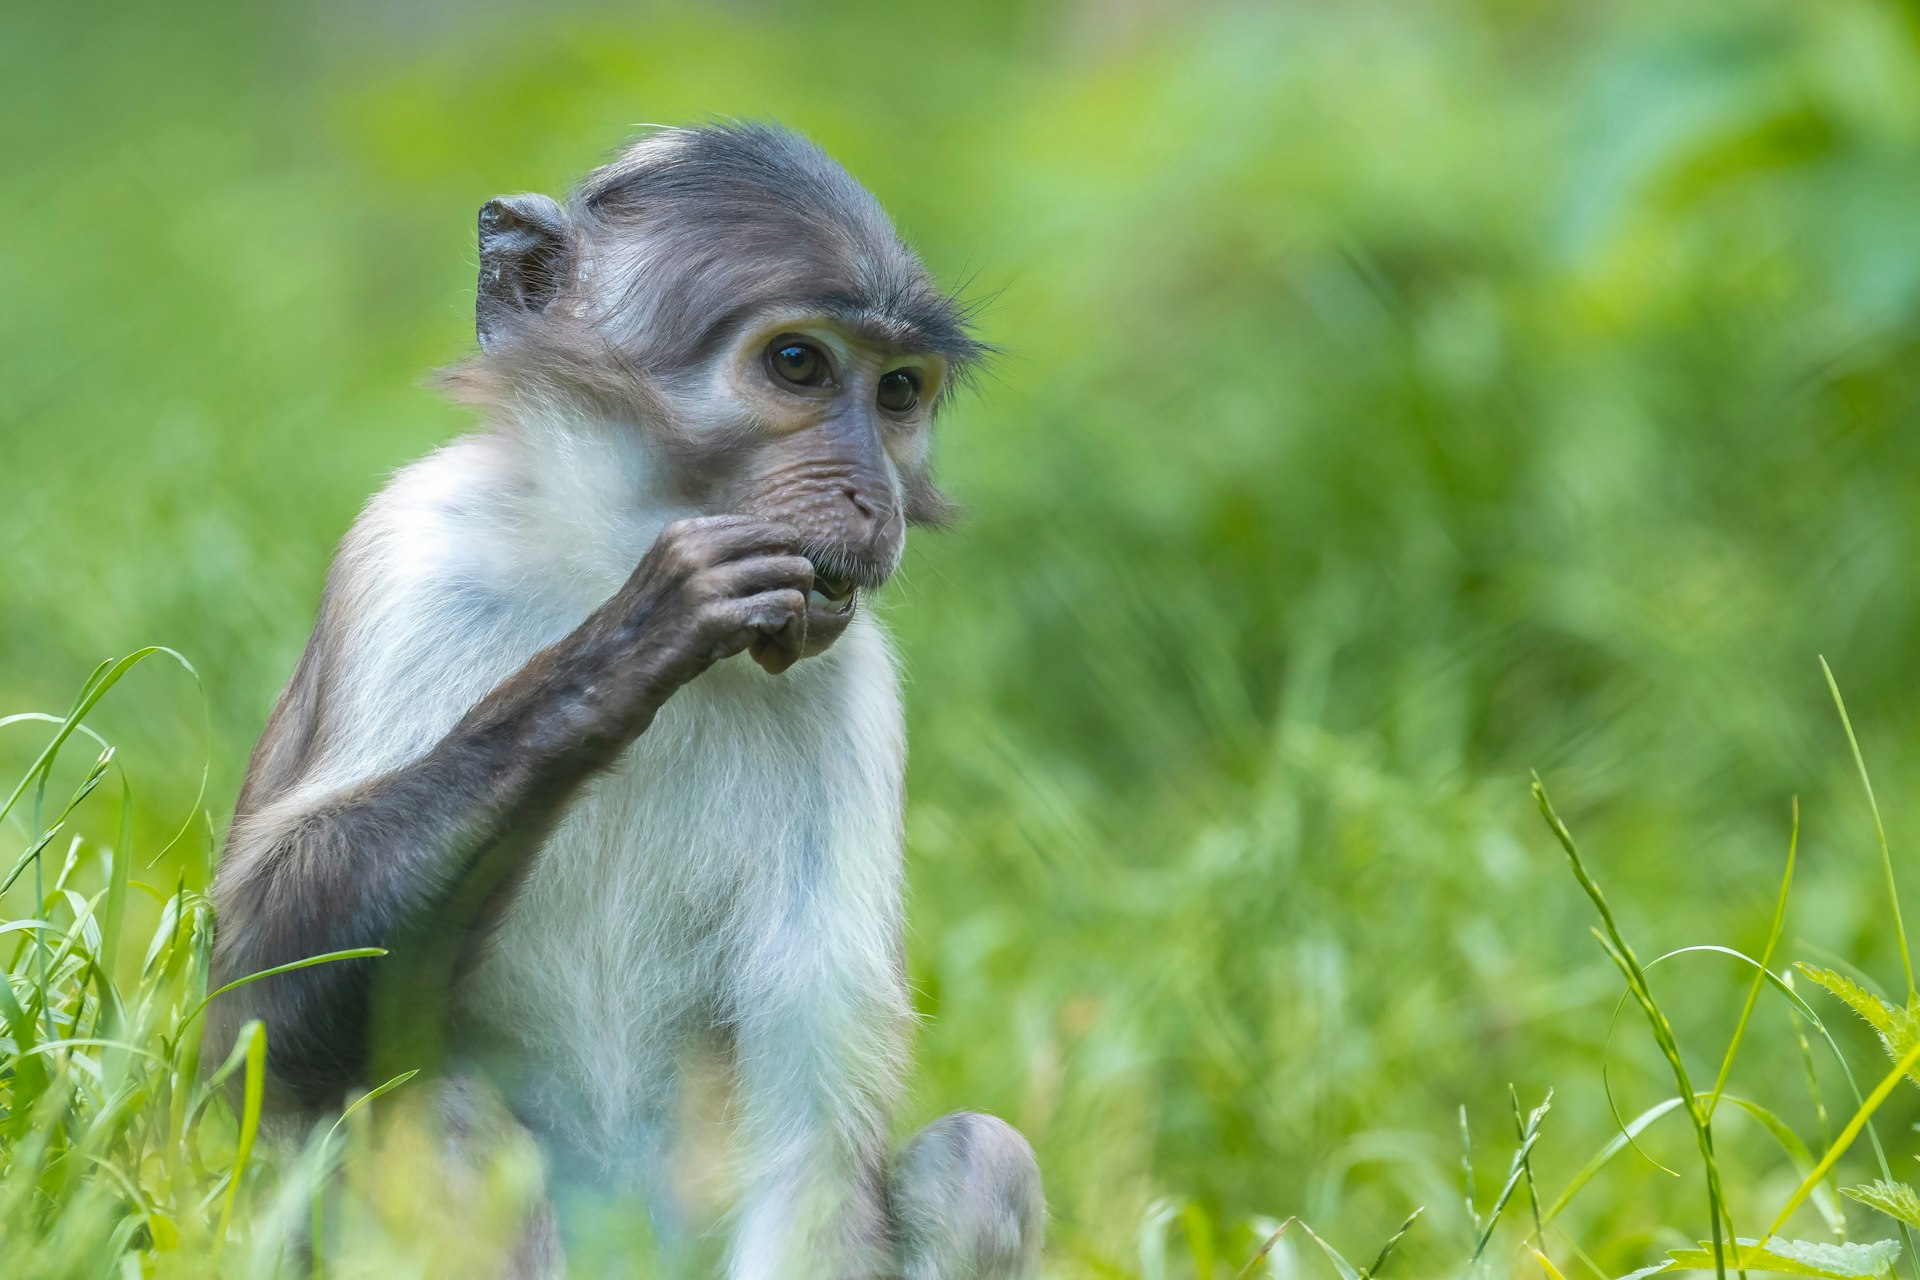 White-naped mangabey, Cercocebus atys lunulatus, eating leaves while sitting in grass